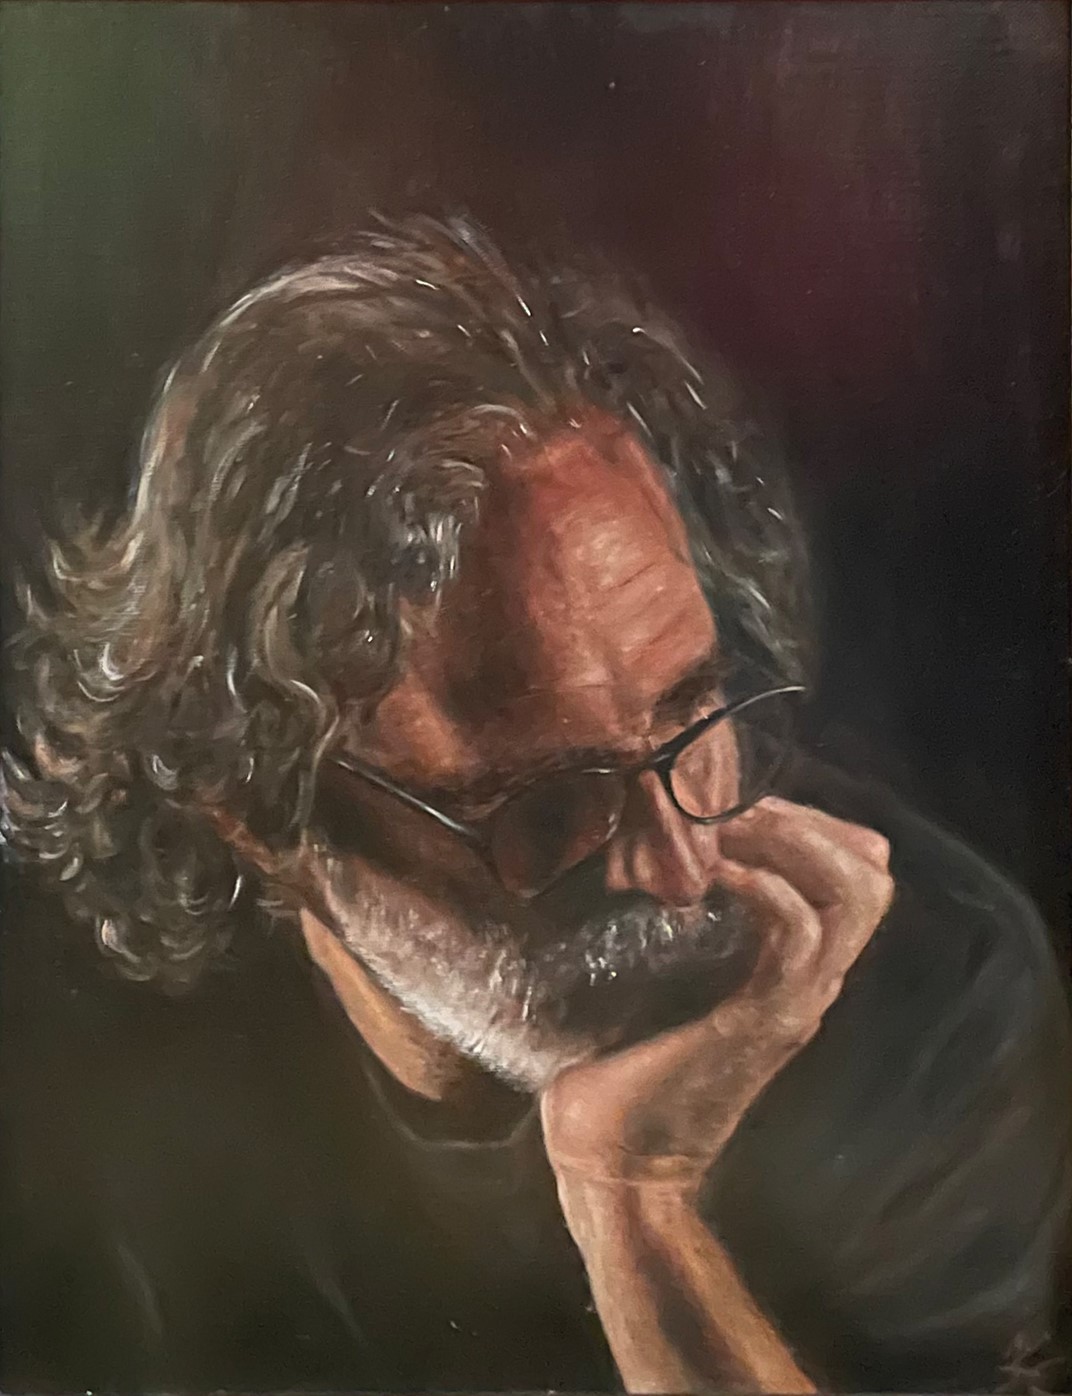 Reflective Painter is a portrait of Chandla’s first mentor, artist Mark Carder. Oil on canvas.